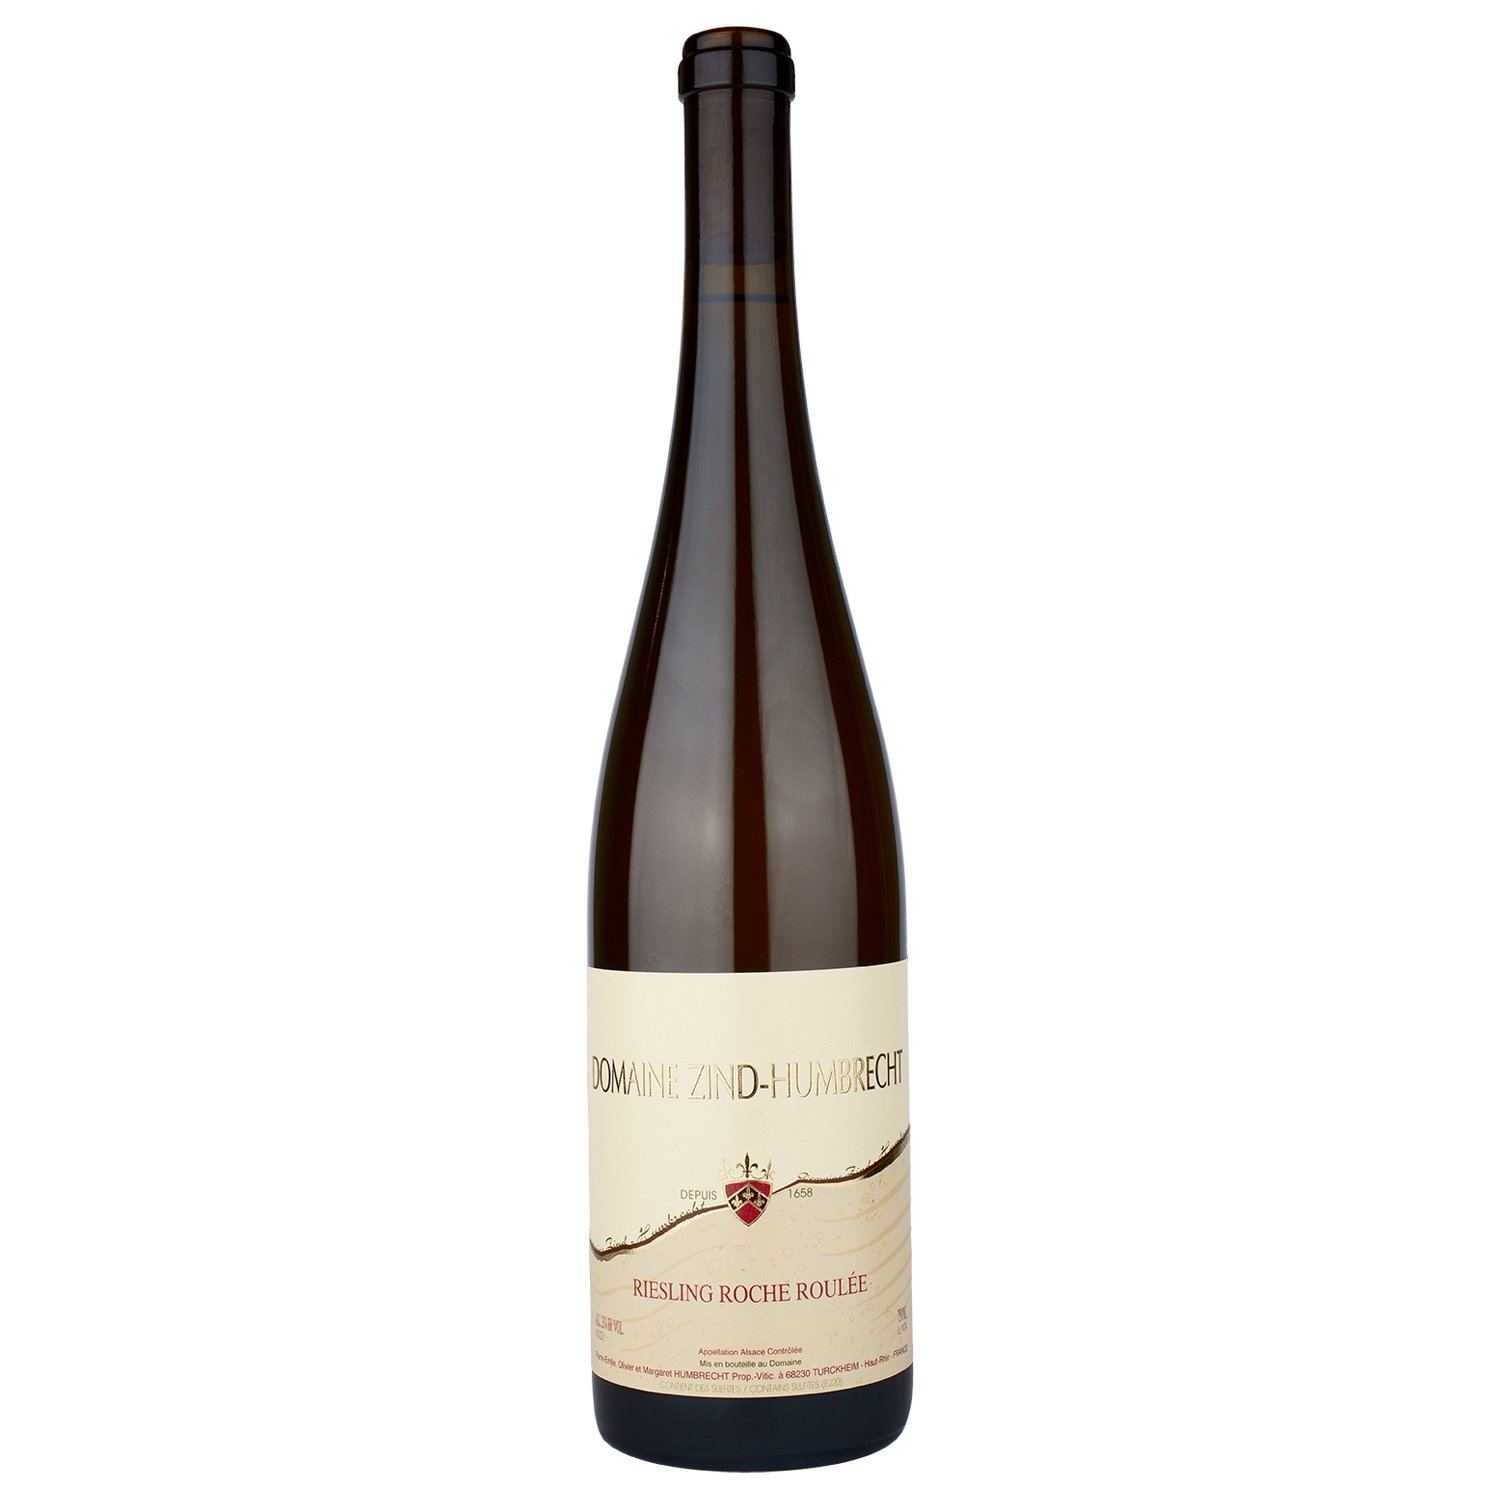 Вино Zind-Humbrecht Riesling Roche Roulee 2019, біле, сухе, 0,75 л (R4904) - фото 1